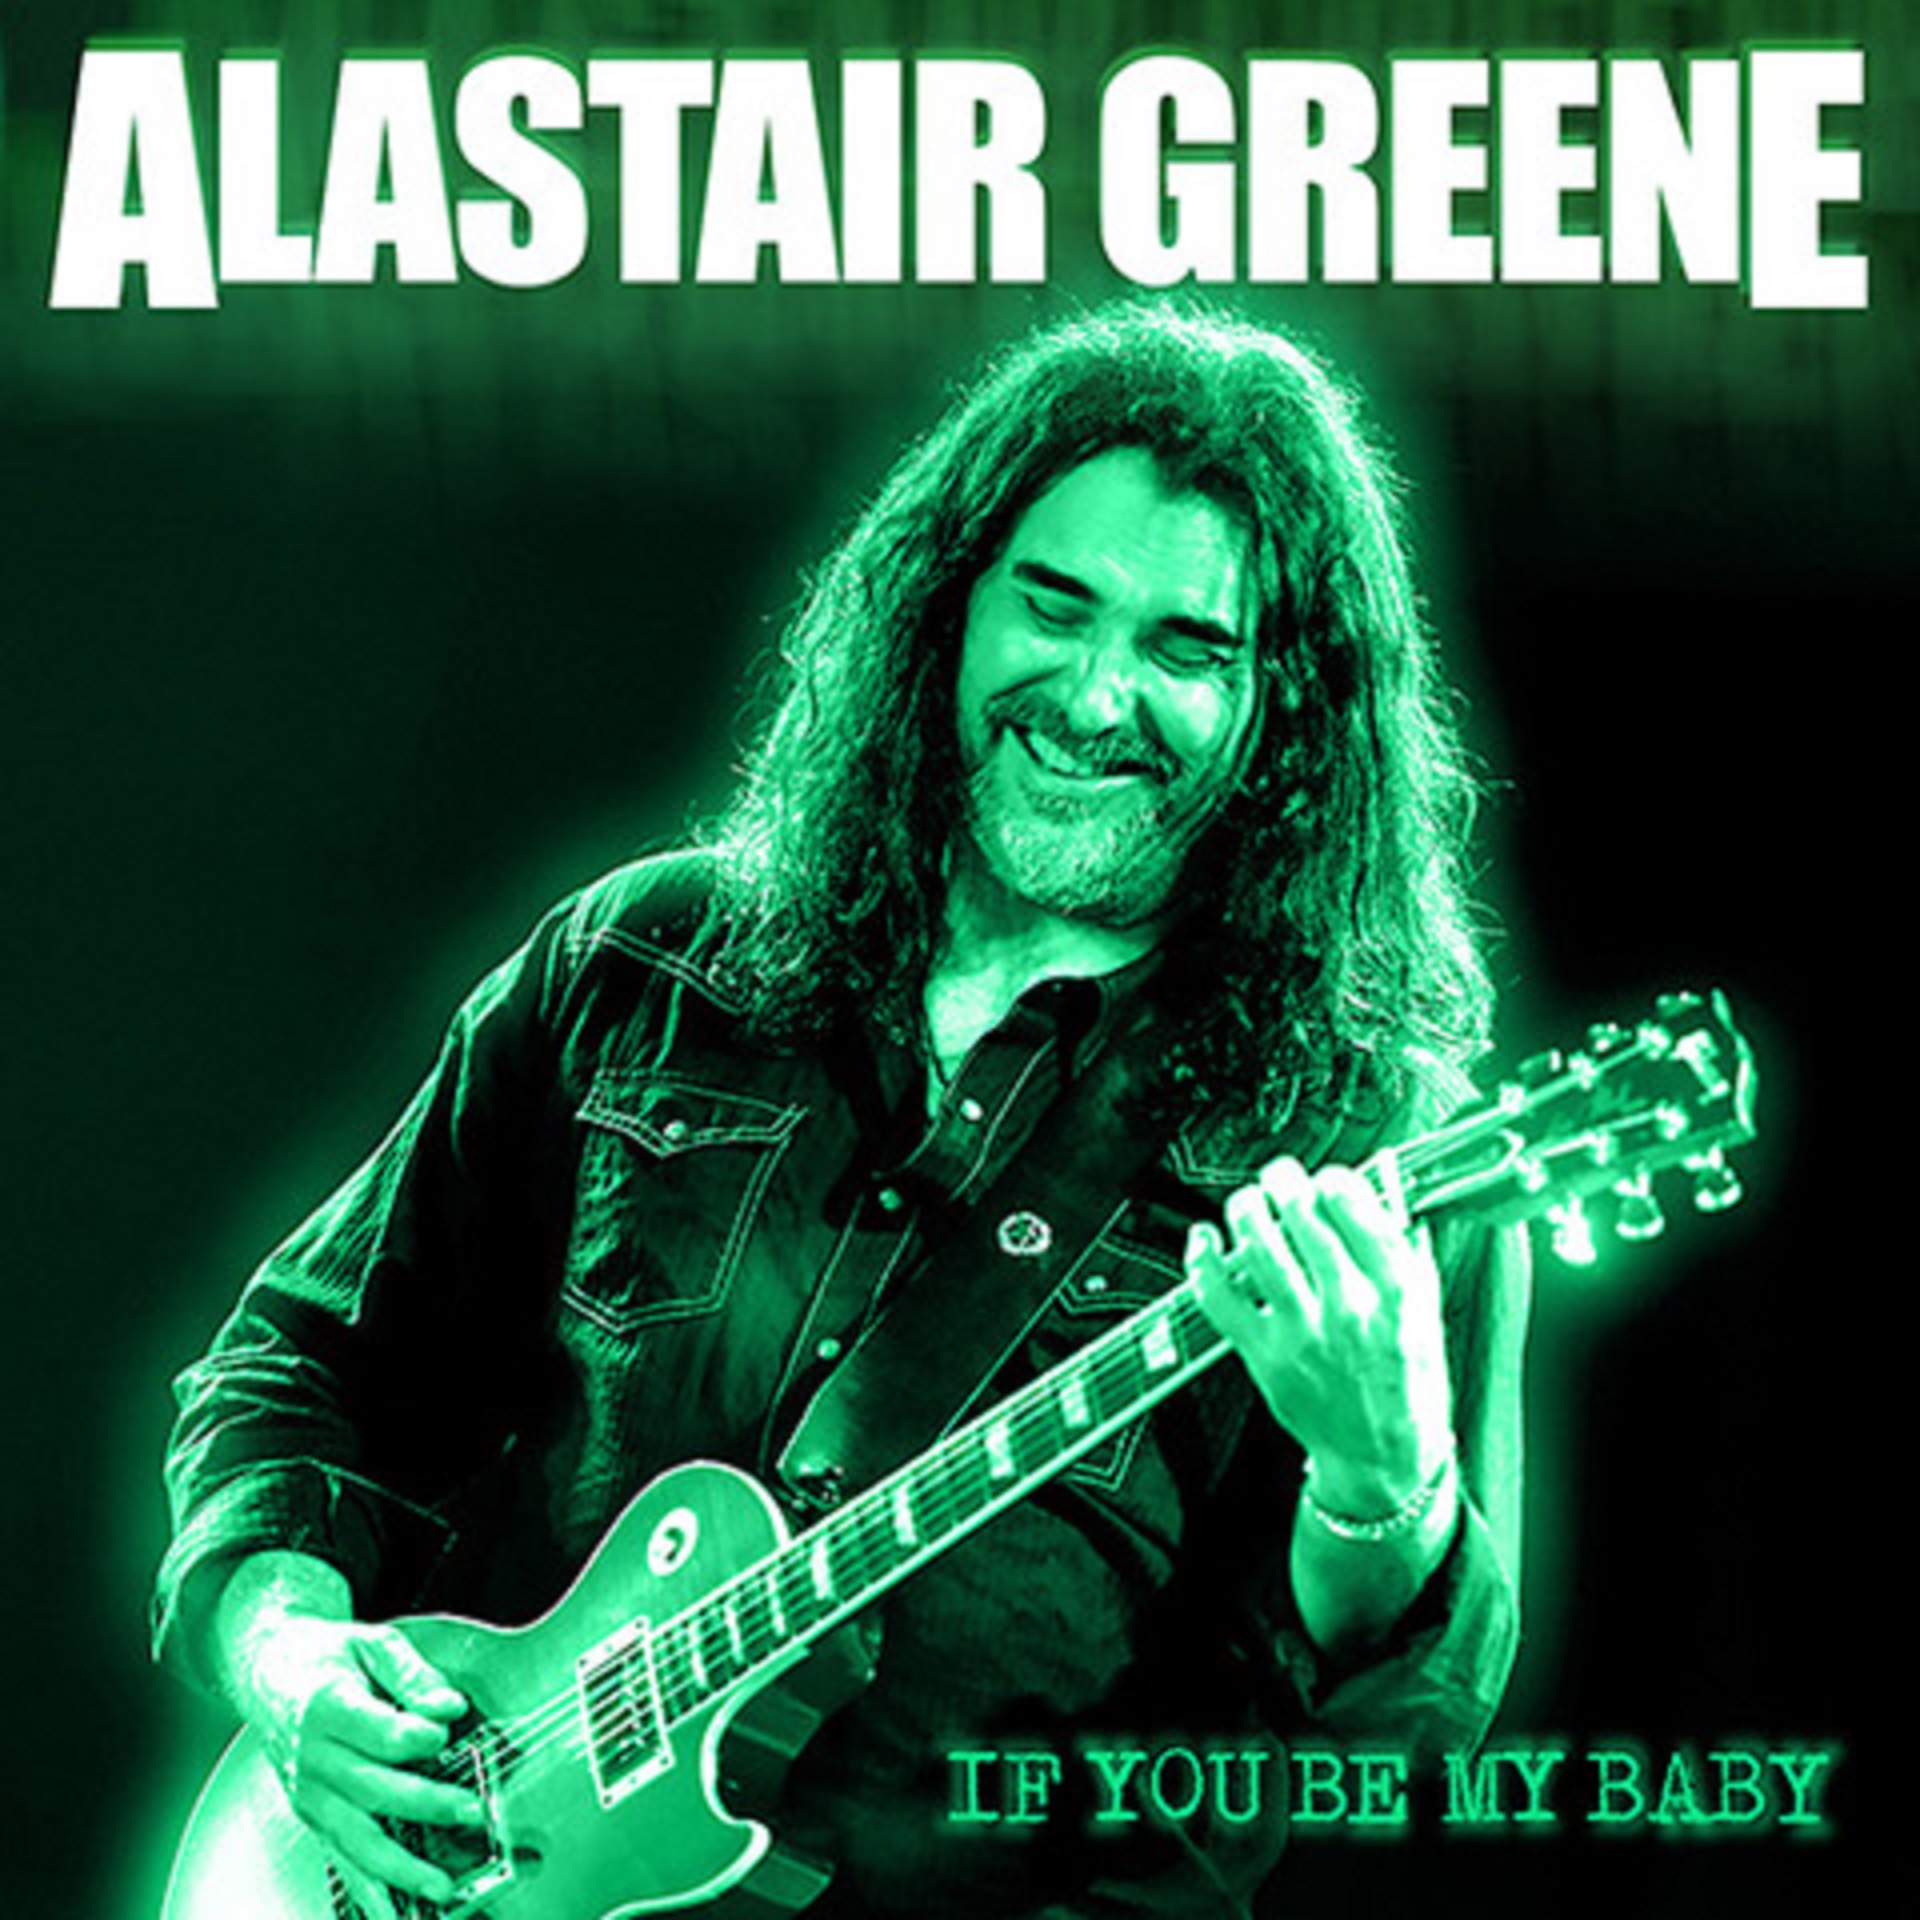 Alastair Greene pays tribute to late British blues guitar legend Peter Green with cover of Fleetwood Mac's ﻿“If You Be My Baby”